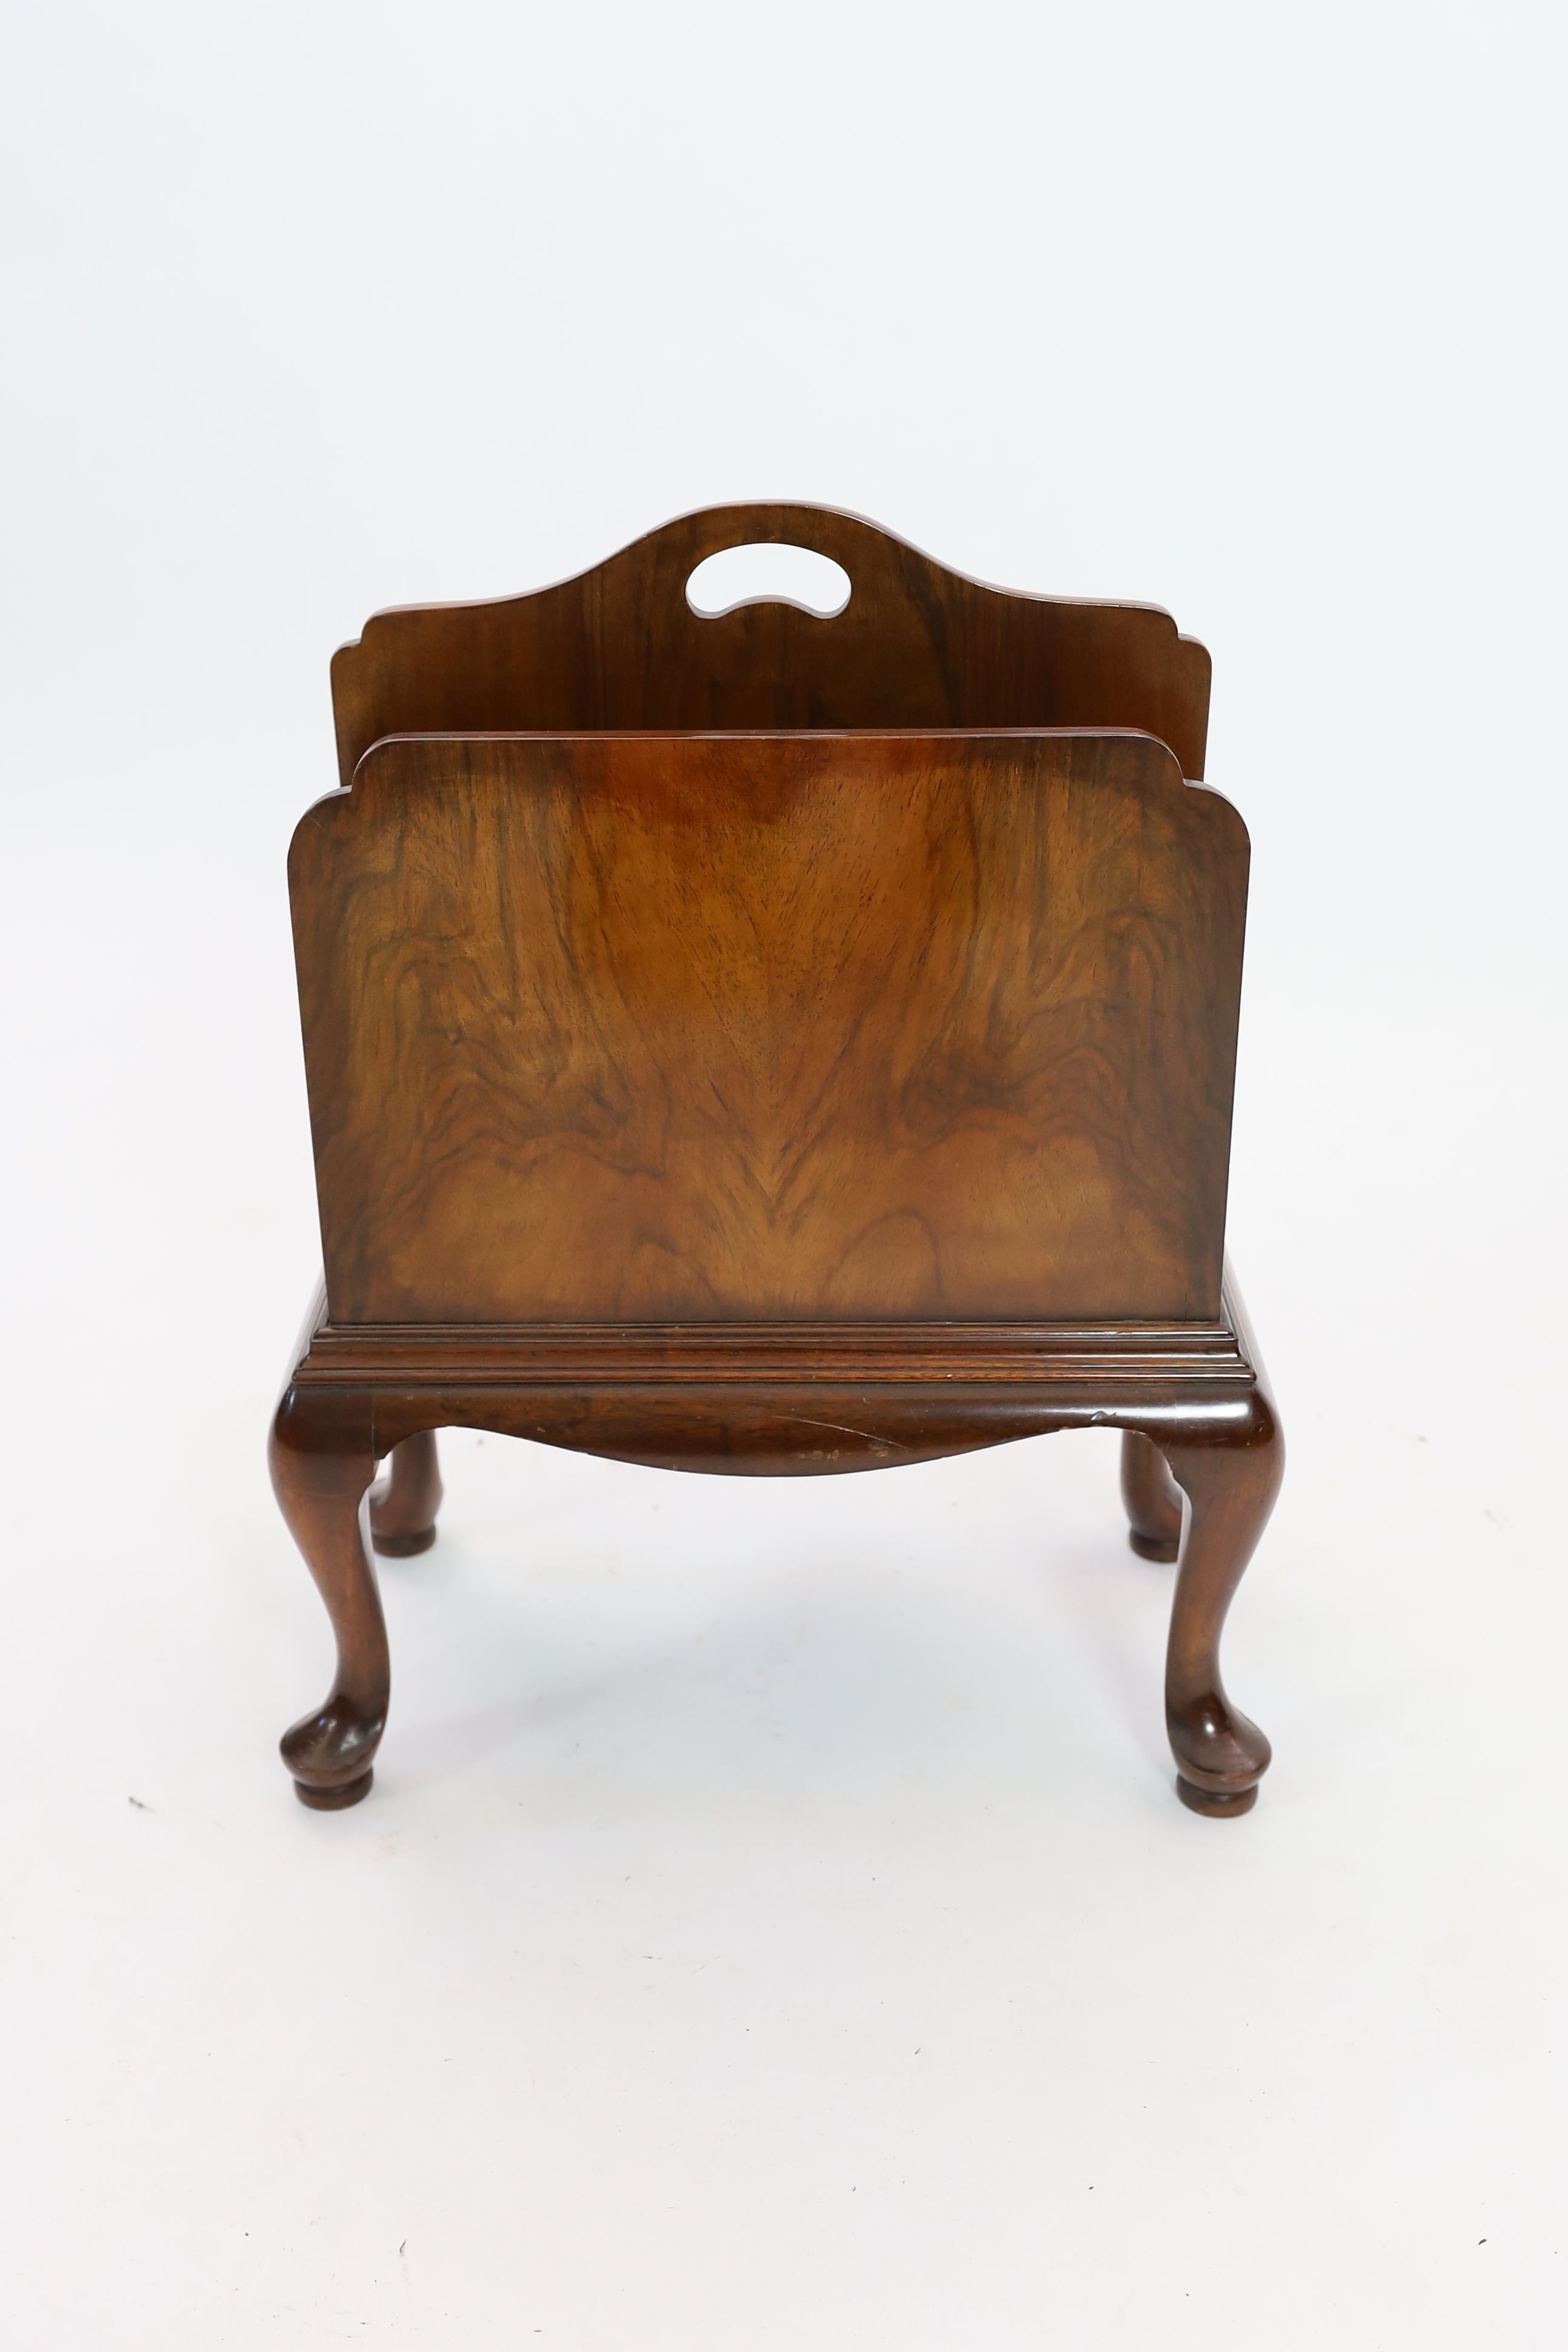 A Queen Anne revival walnut two division newspaper stand, width 44cm depth 23cm height 60cm